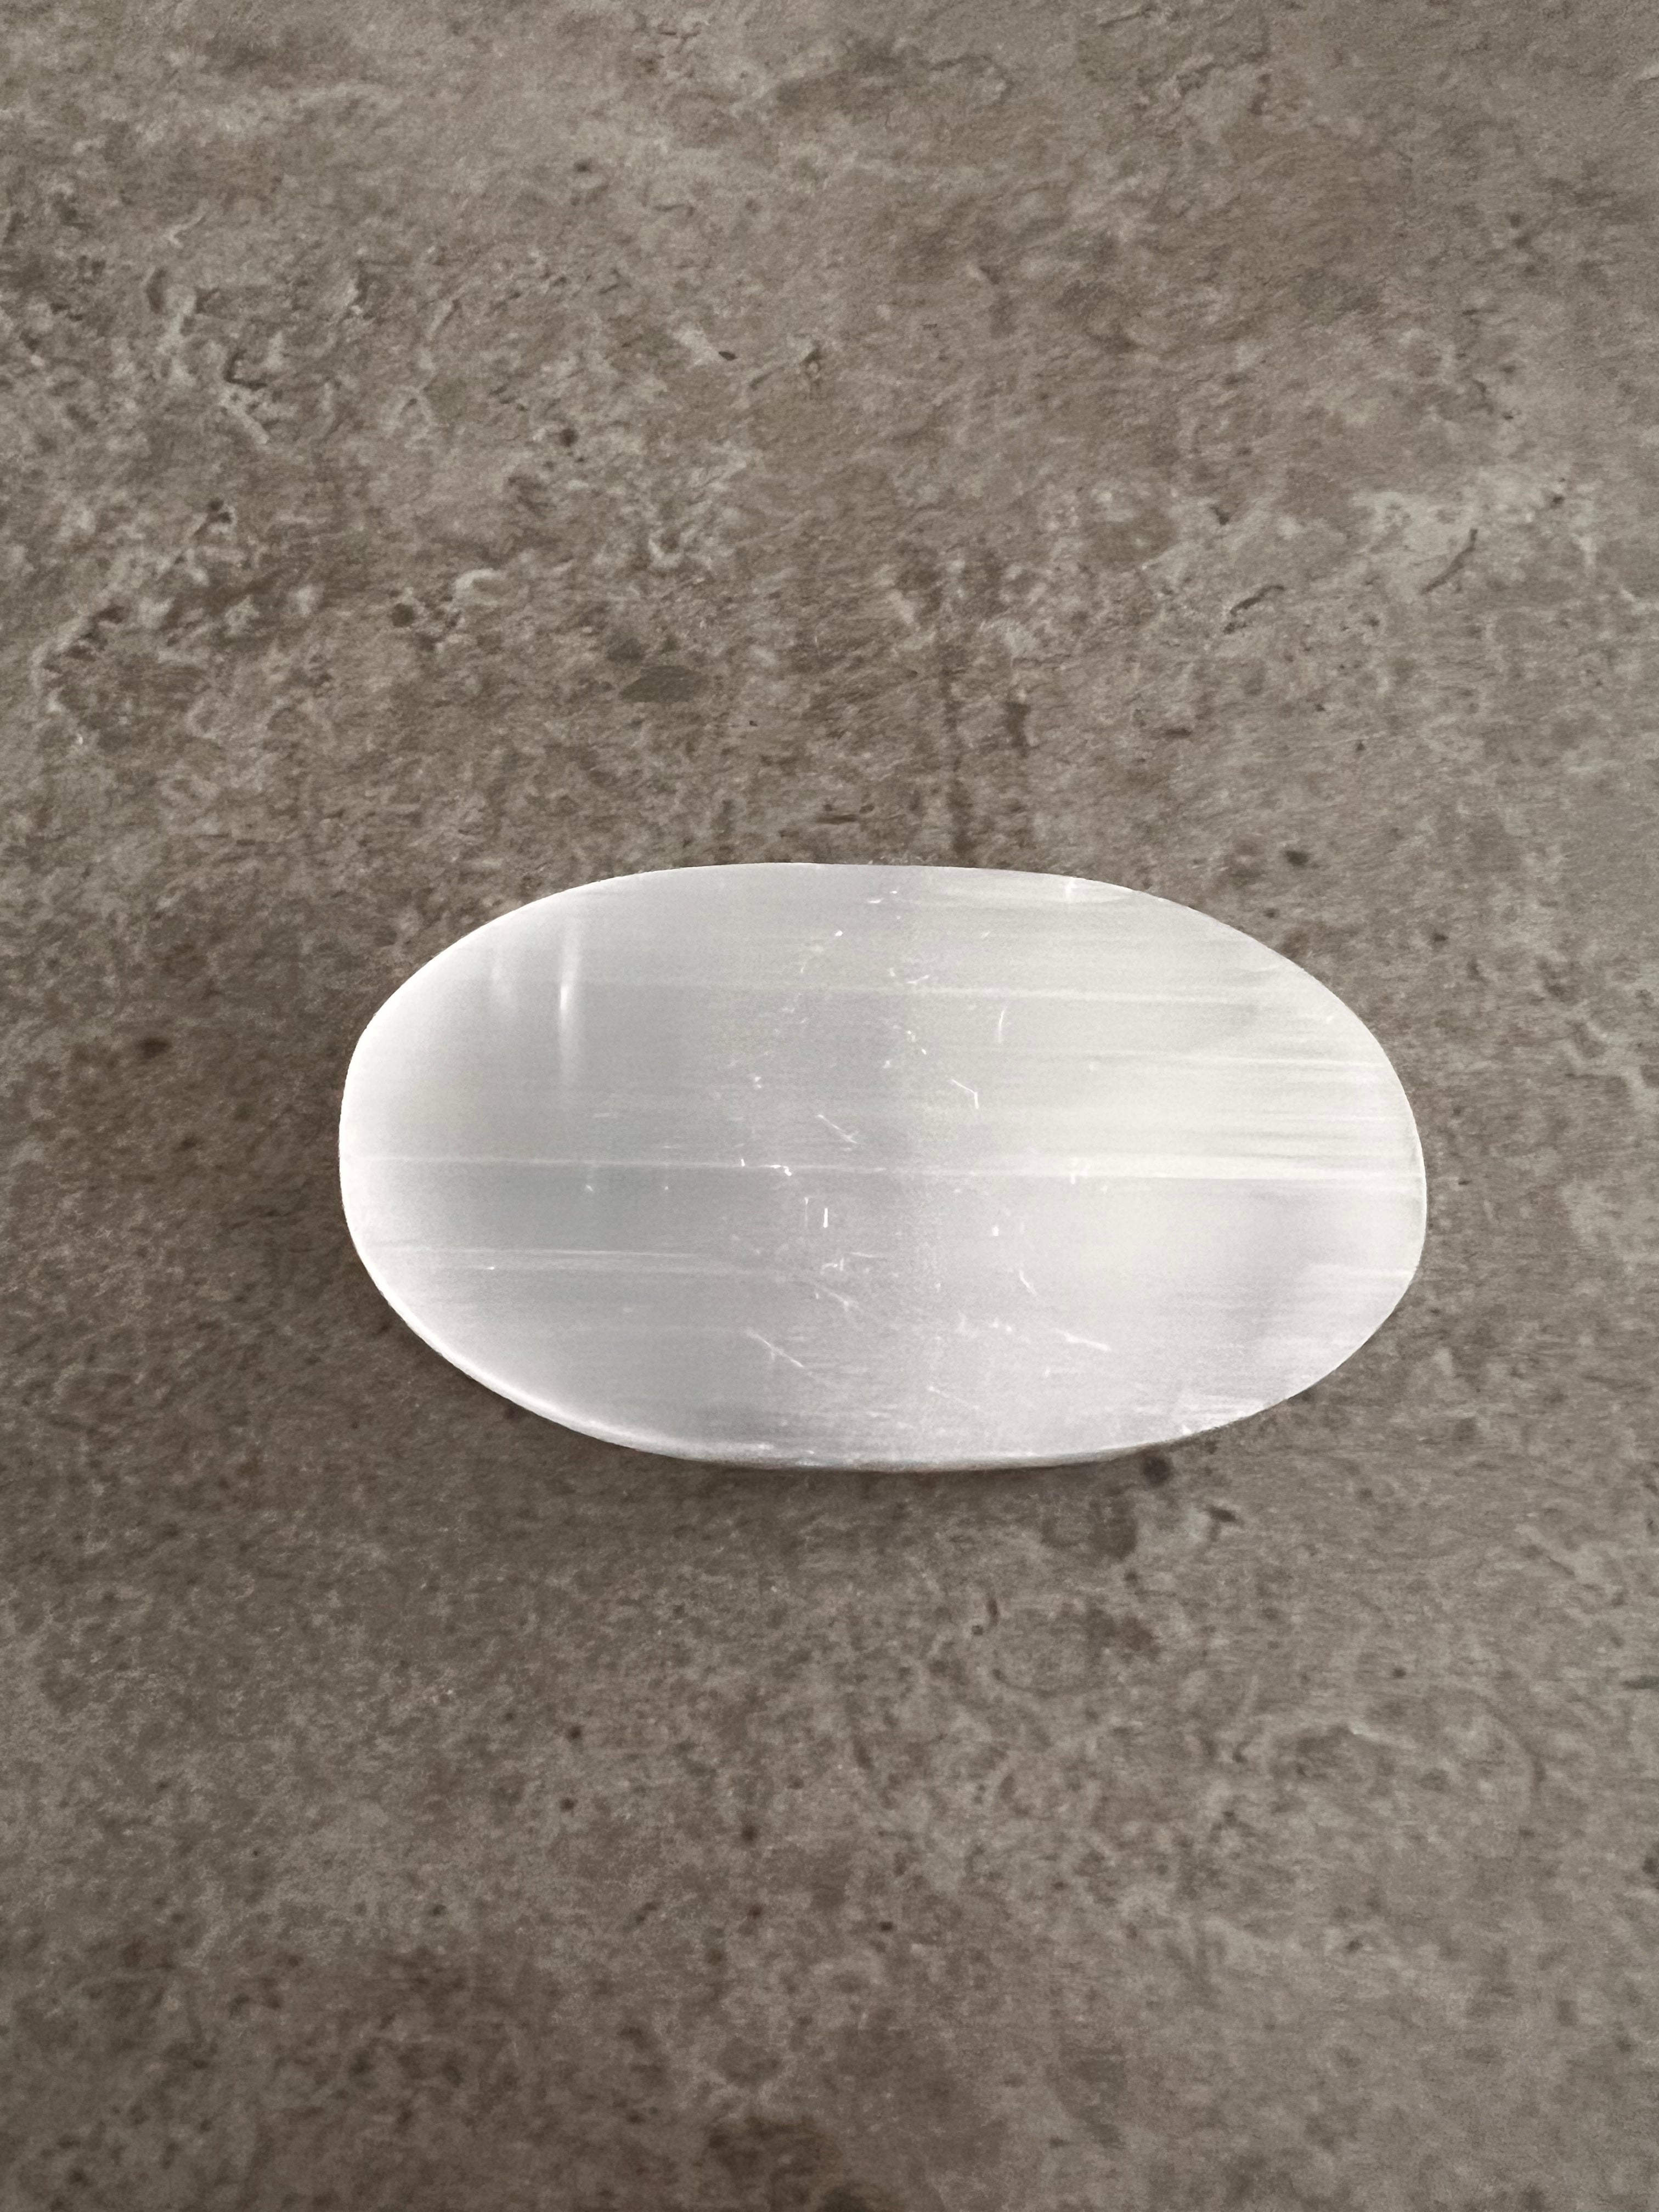 Selenite Flat Palm Stones - Gentle healing and positive energy